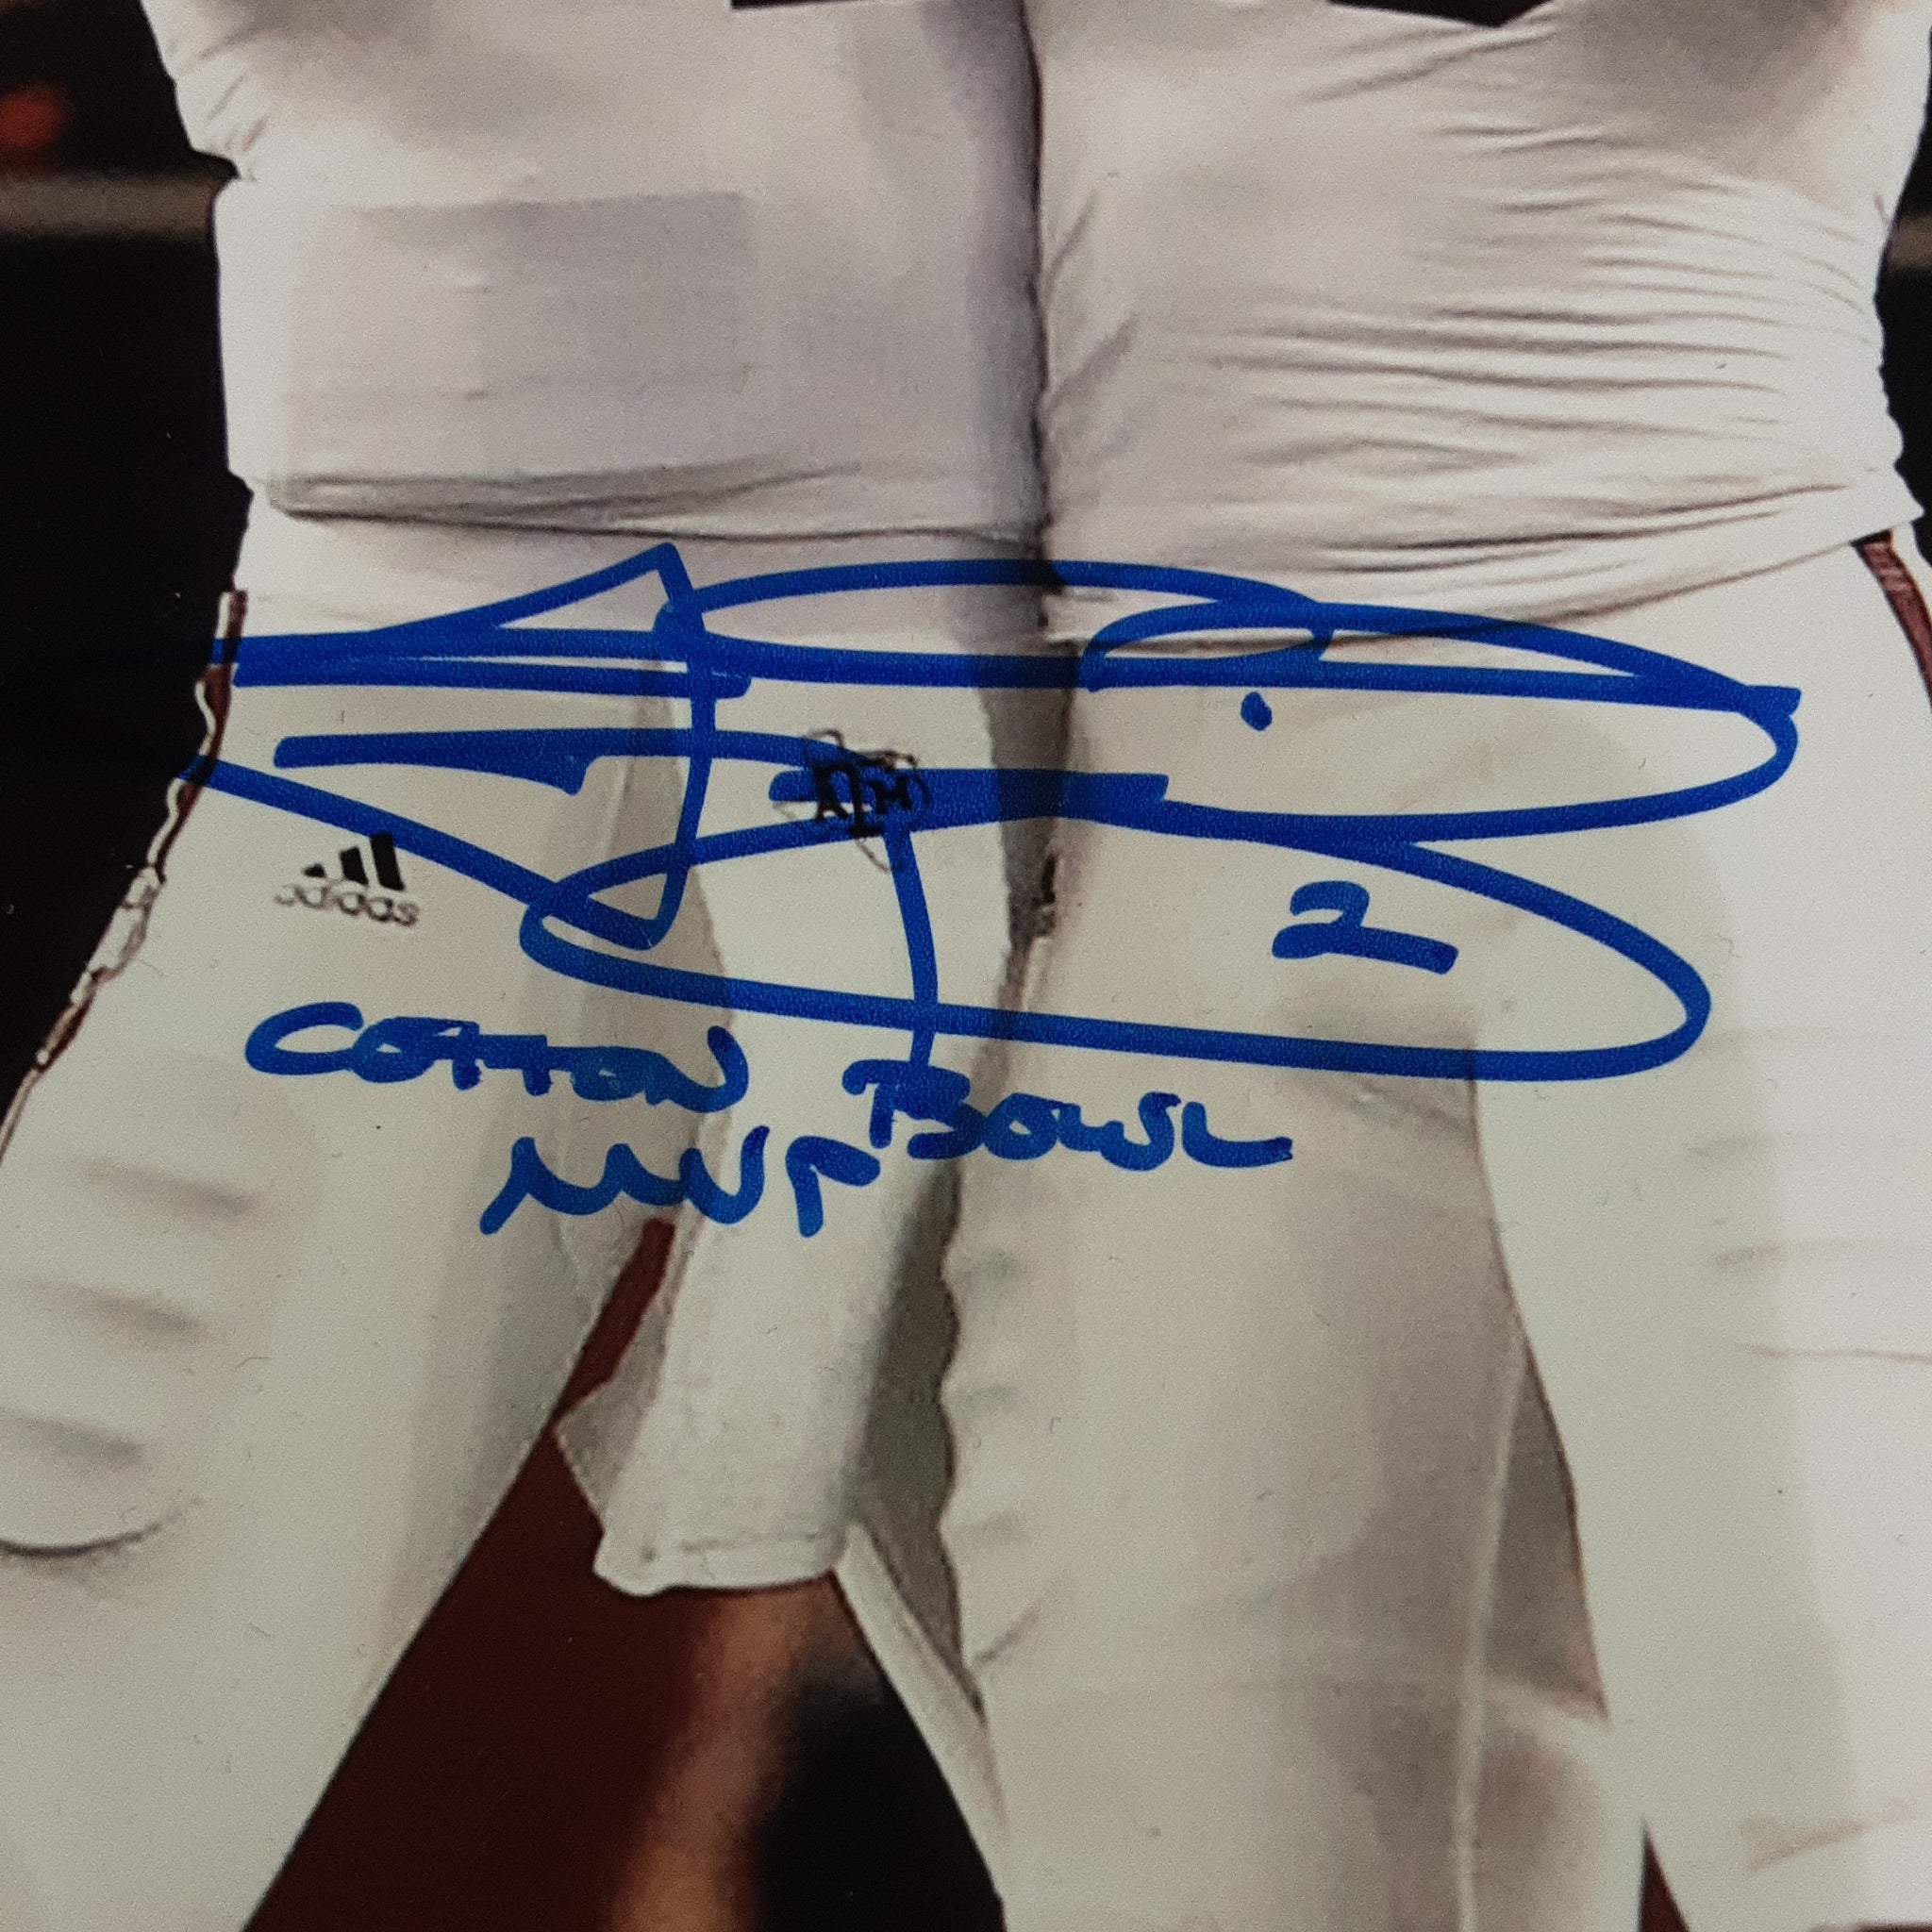 Mike Evans and Johnny Manziel Authentic Signed Framed 11x14 Photo Autographed with Inscription JSA